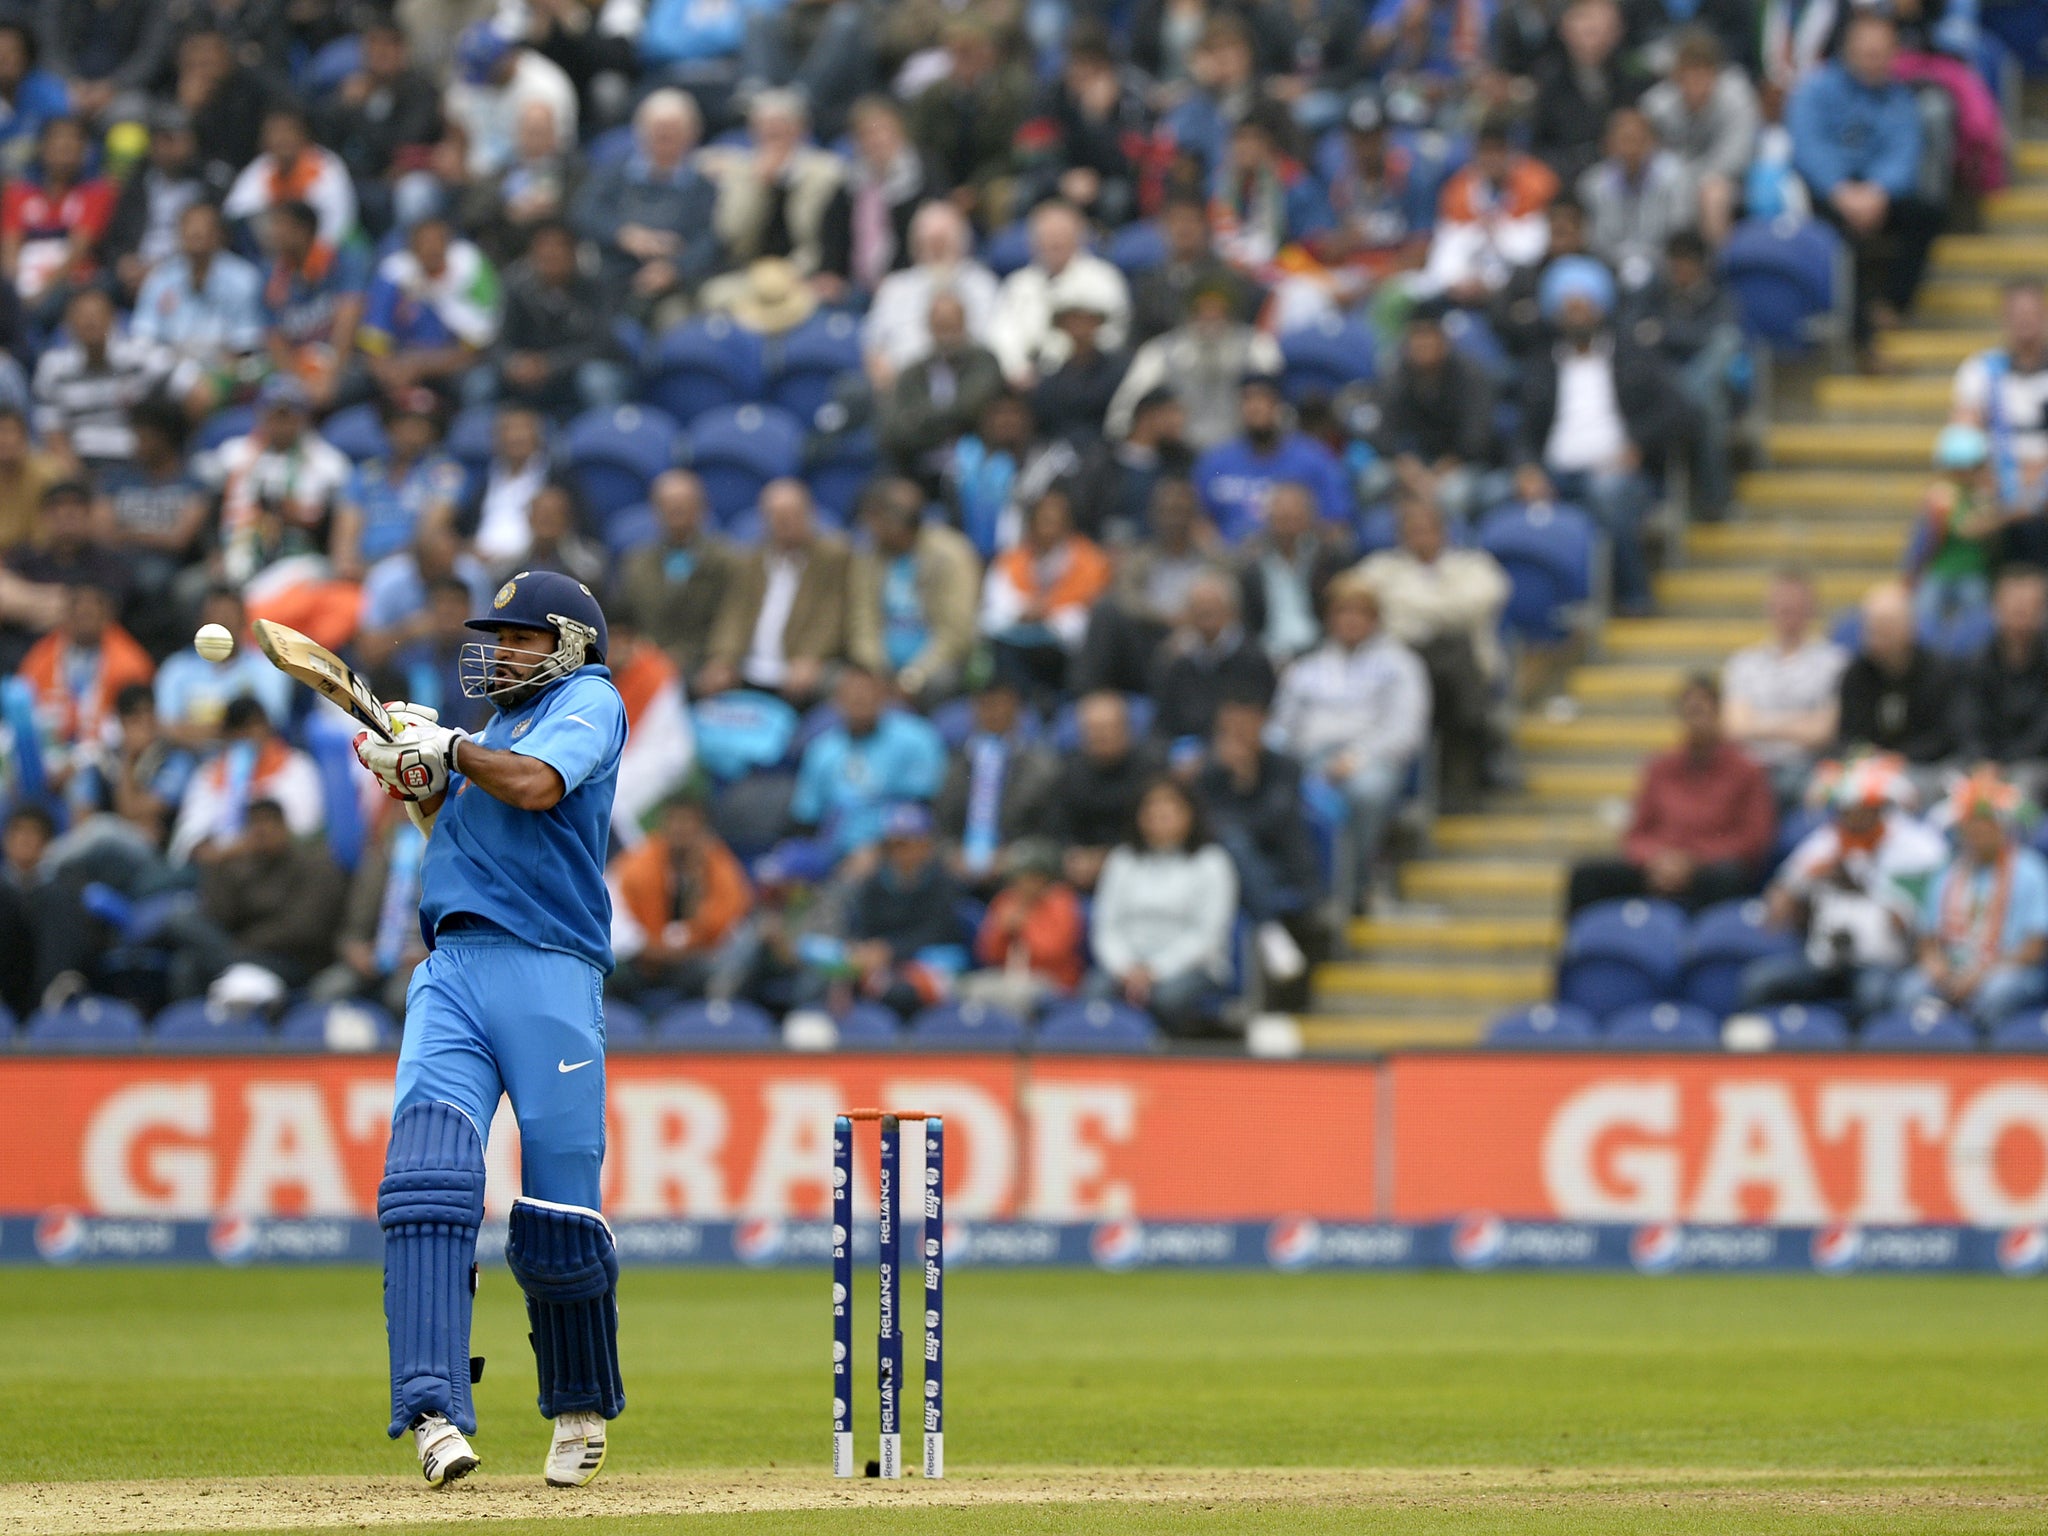 India's Shikhar Dhawan batting during the 2013 ICC Champions Trophy semi-final cricket match between India and Sri Lanka at the Cardiff Wales Stadium in Cardiff